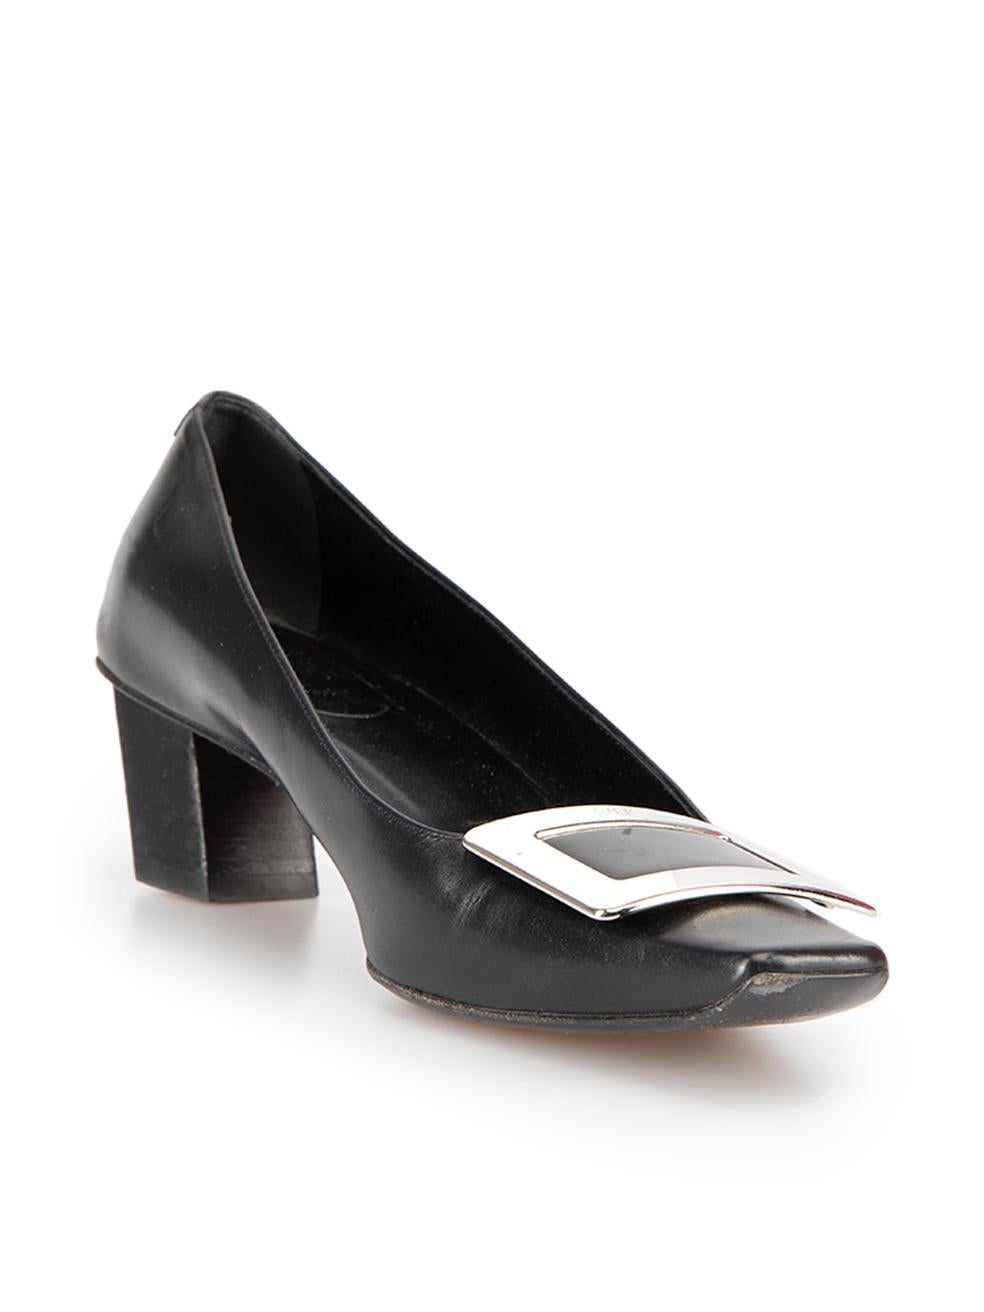 CONDITION is Very good. Minimal wear to pumps is evident. Minimal wear to the leather exterior where scuffs and scratches can be seen. There is also wear to the outsole on this used Roger Vivier designer resale item. This item includes the original